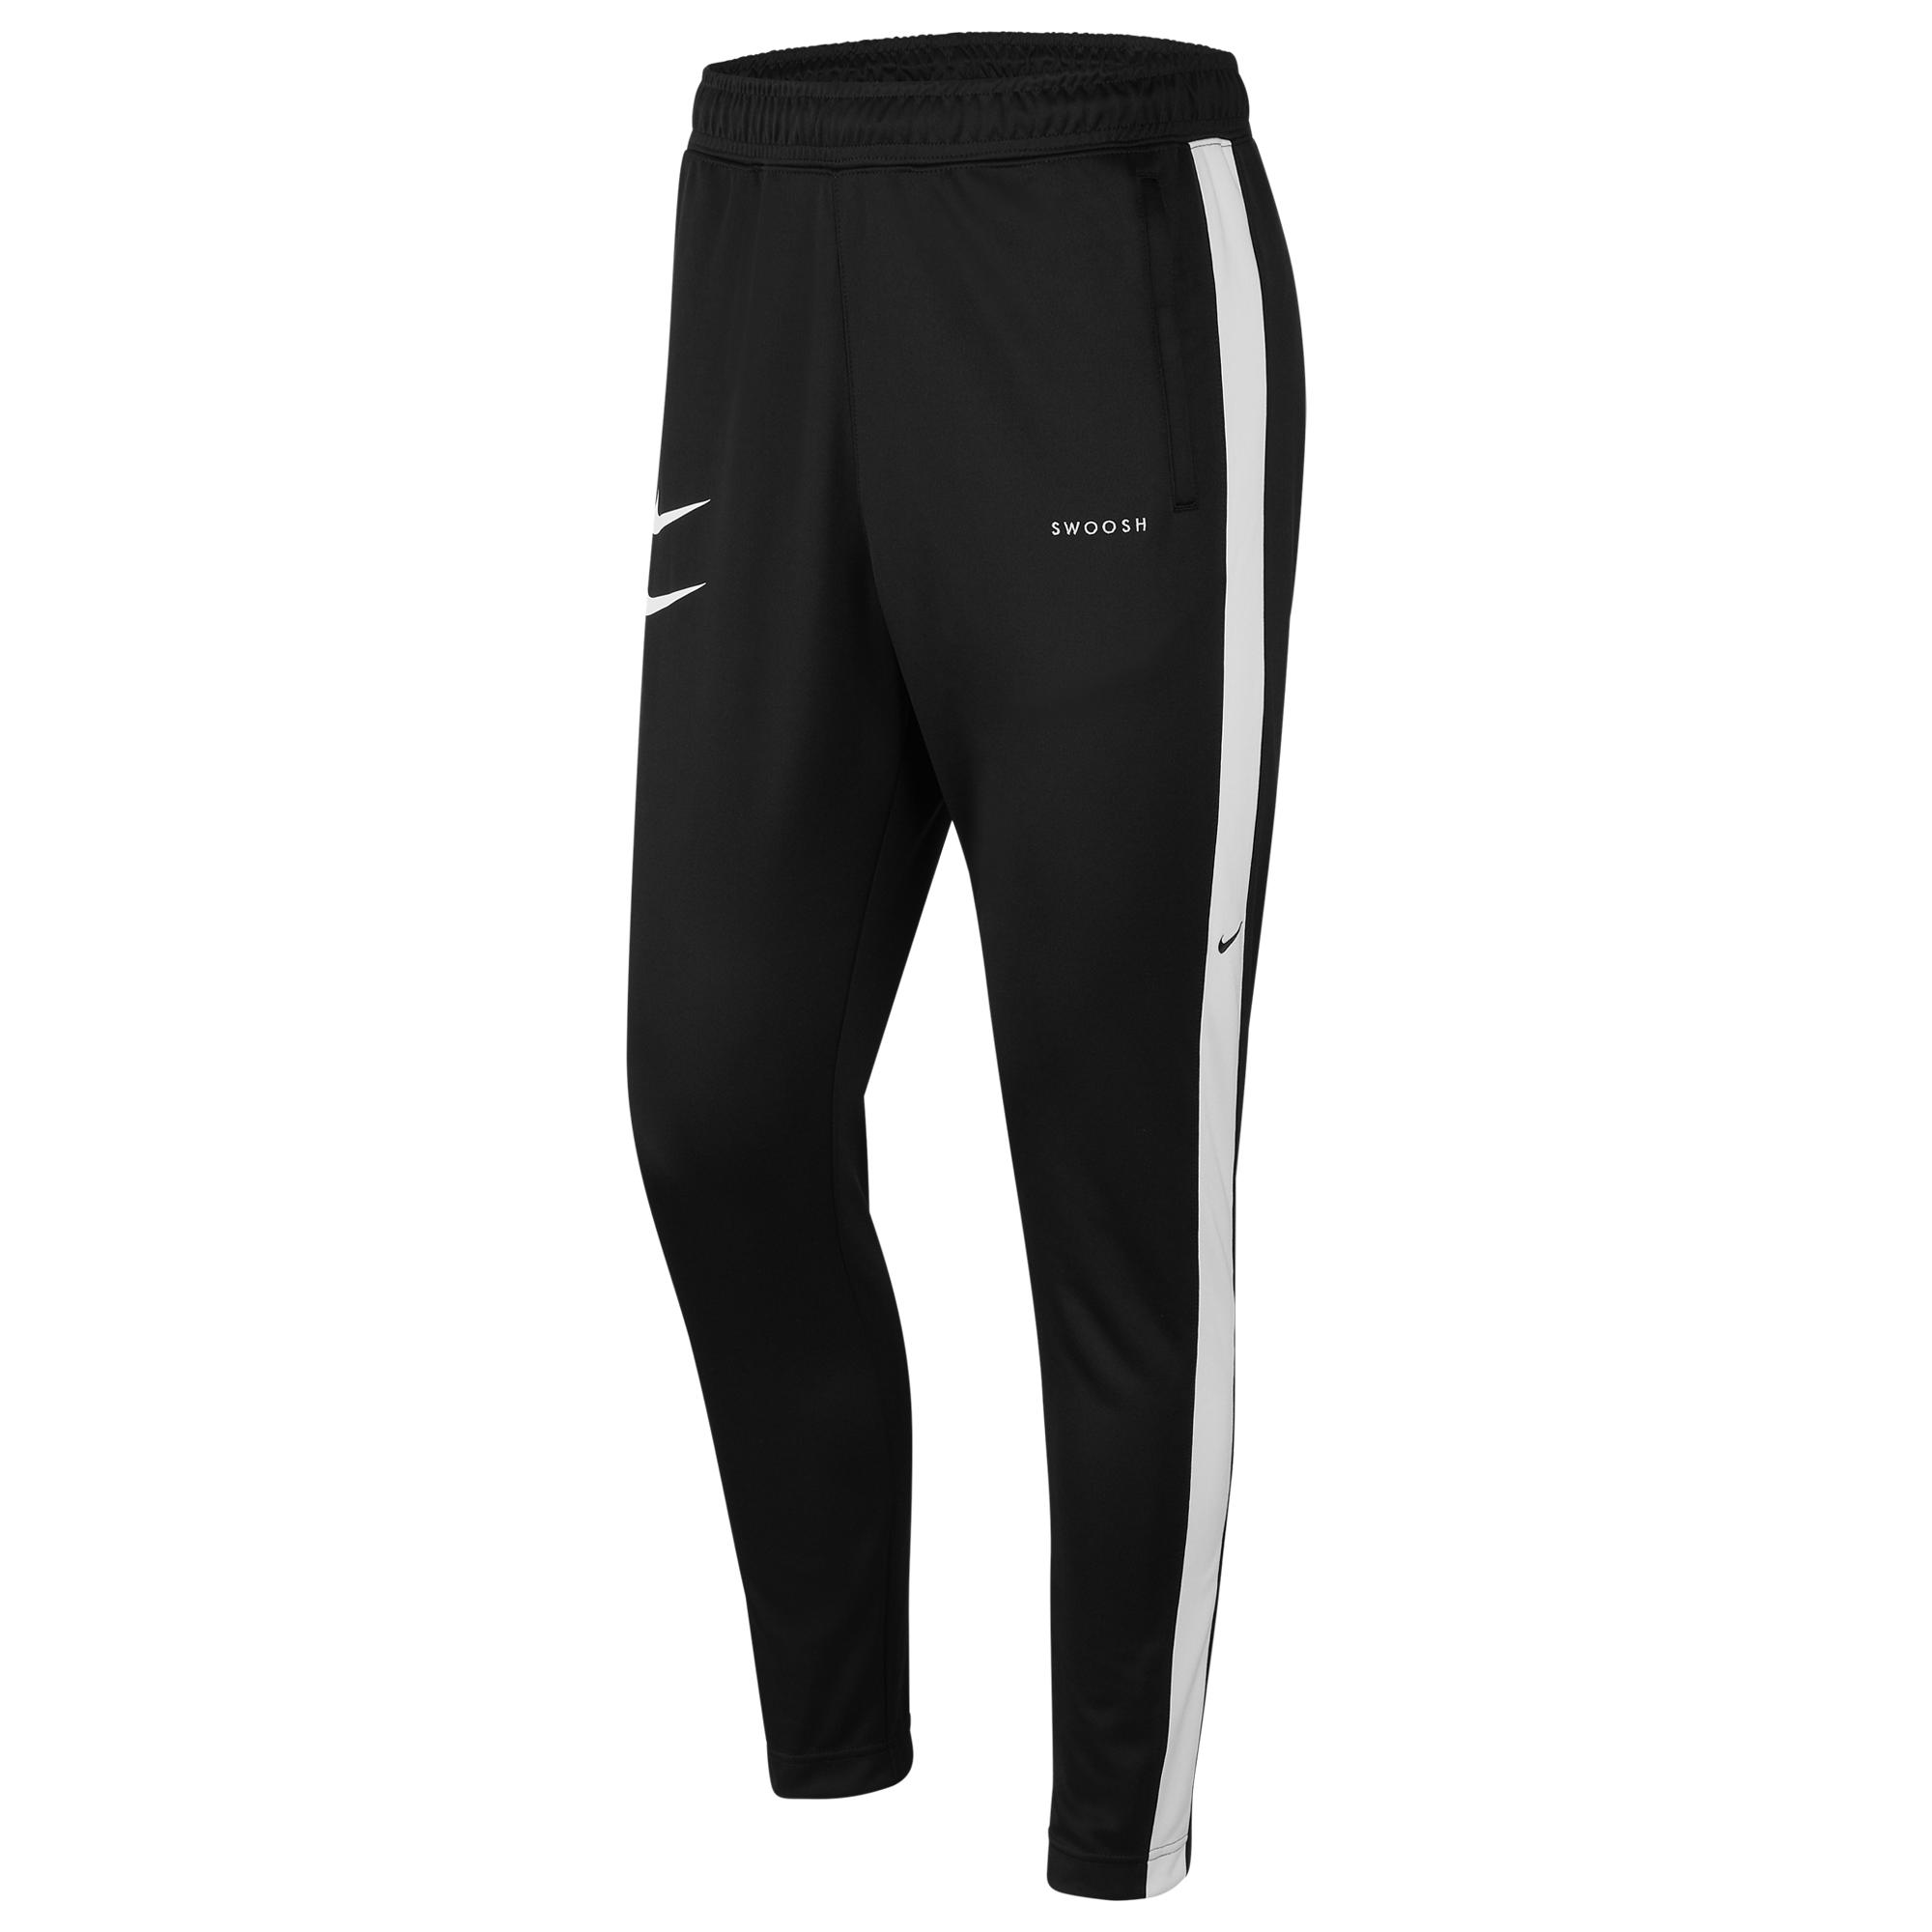 Nike Synthetic Swoosh Poly Knit Pants in Black/White (Black) for Men - Lyst